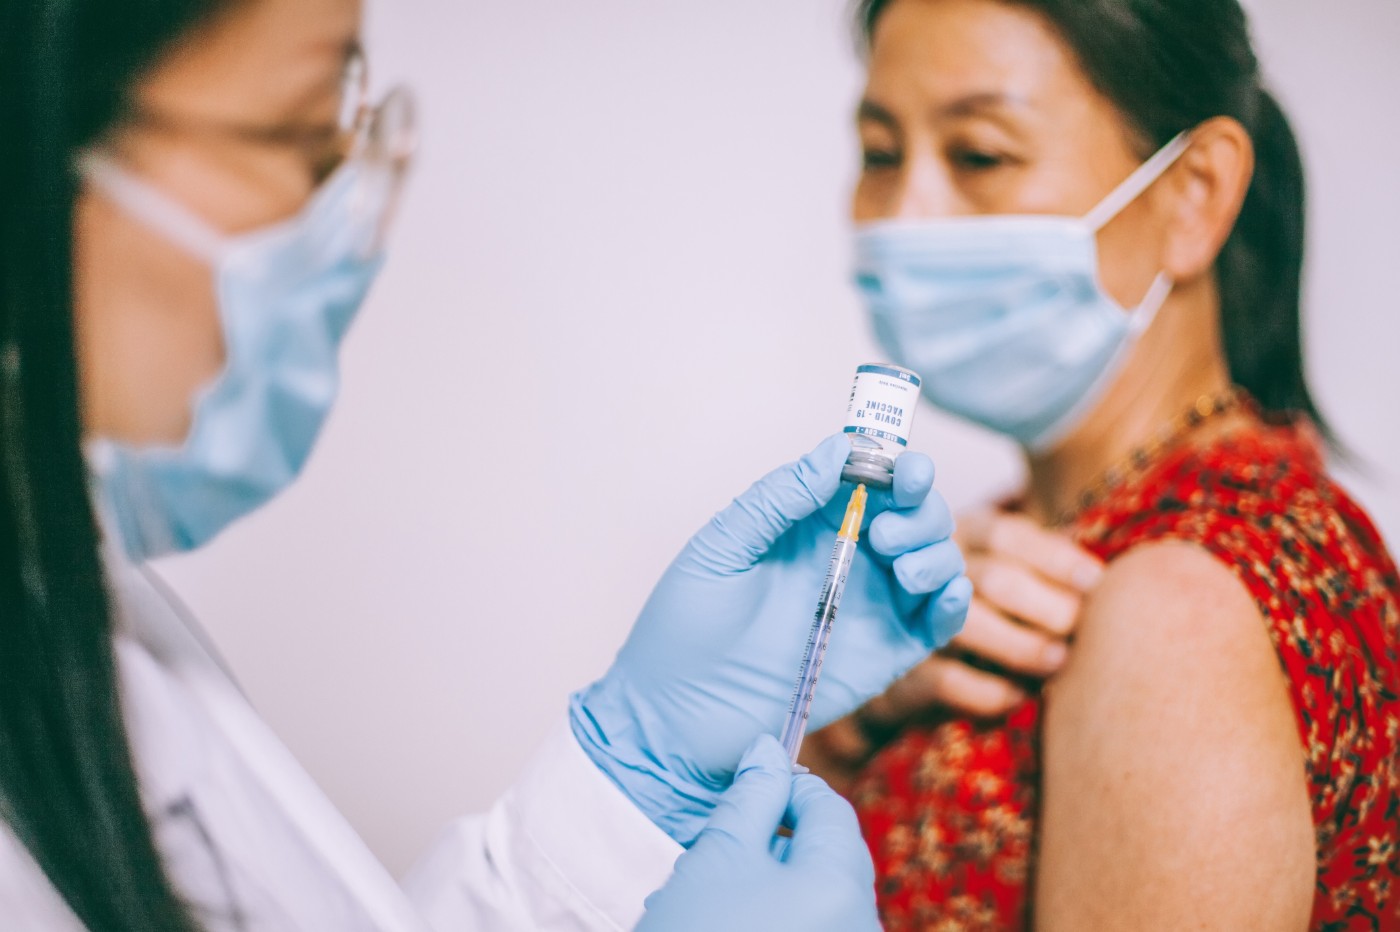 https://tickertapecdn.tdameritrade.com/assets/images/pages/md/health care professional giving covid-19 vaccine to woman: post-COVID investing opportunities and risks